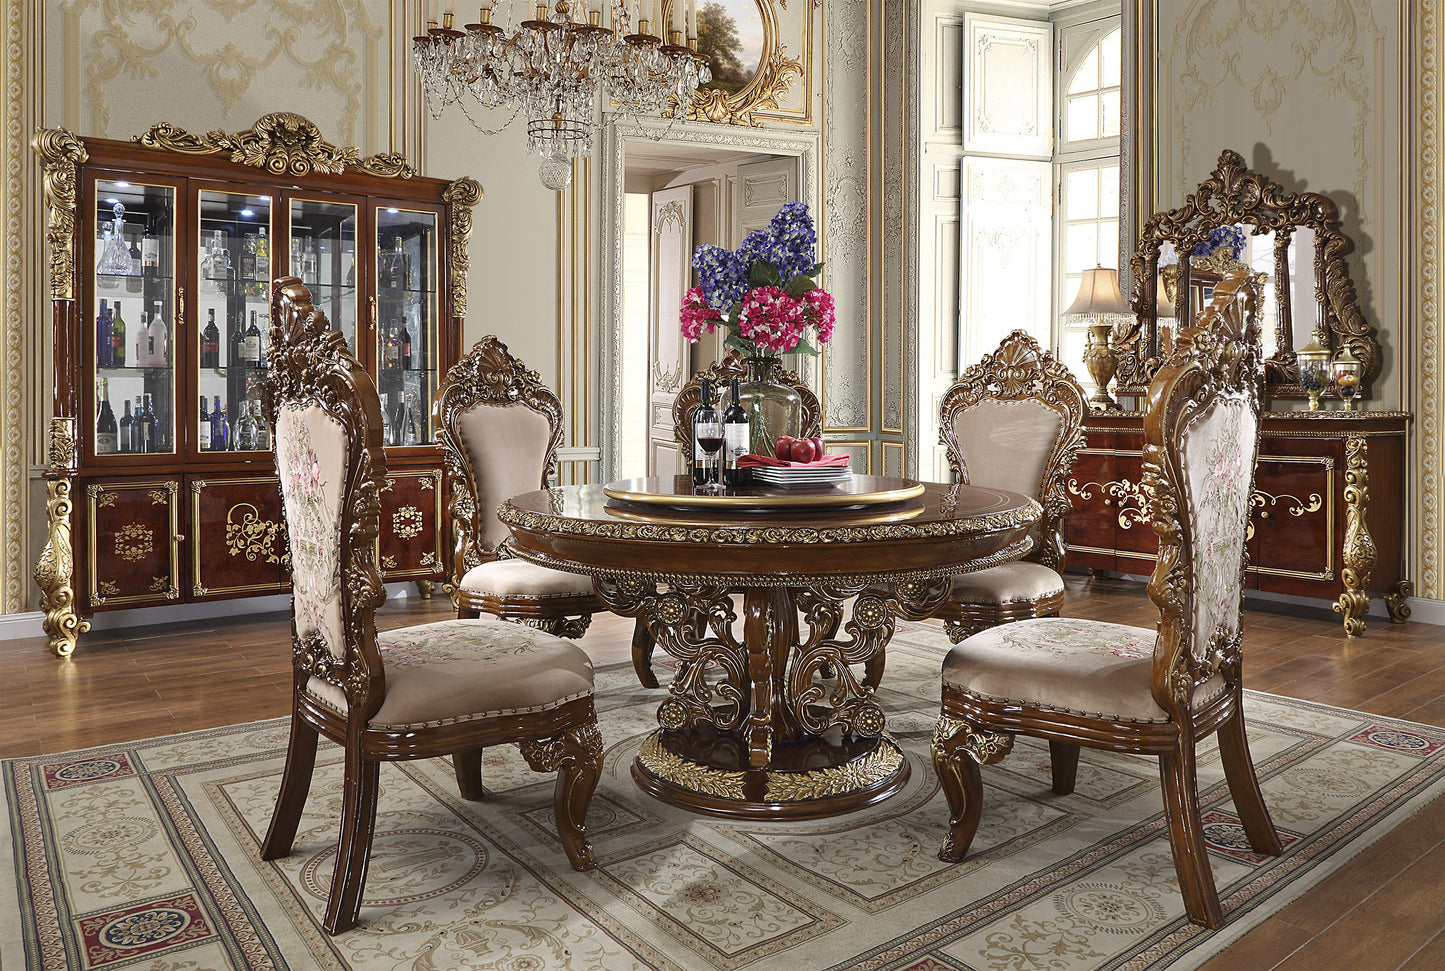 5 PC Round Dining Set in Burl & Antique Gold Finish w Fabric Seat 1803-5PC-RD